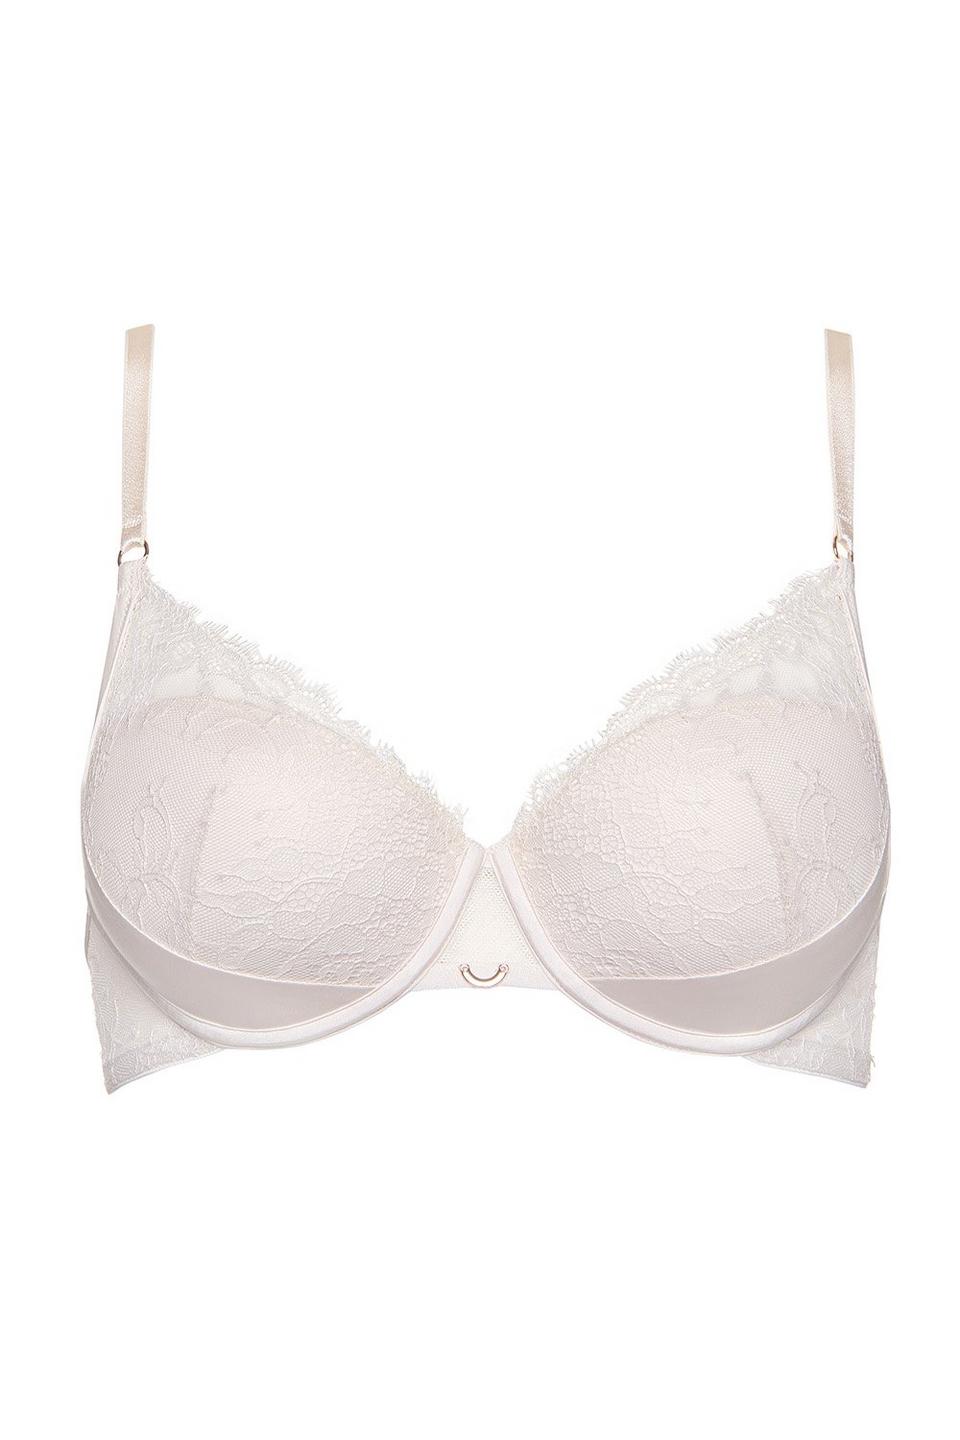 Lingerie | Lace 'Rose' Underwired T-Shirt Bra (Fuller Bust) | Lisca